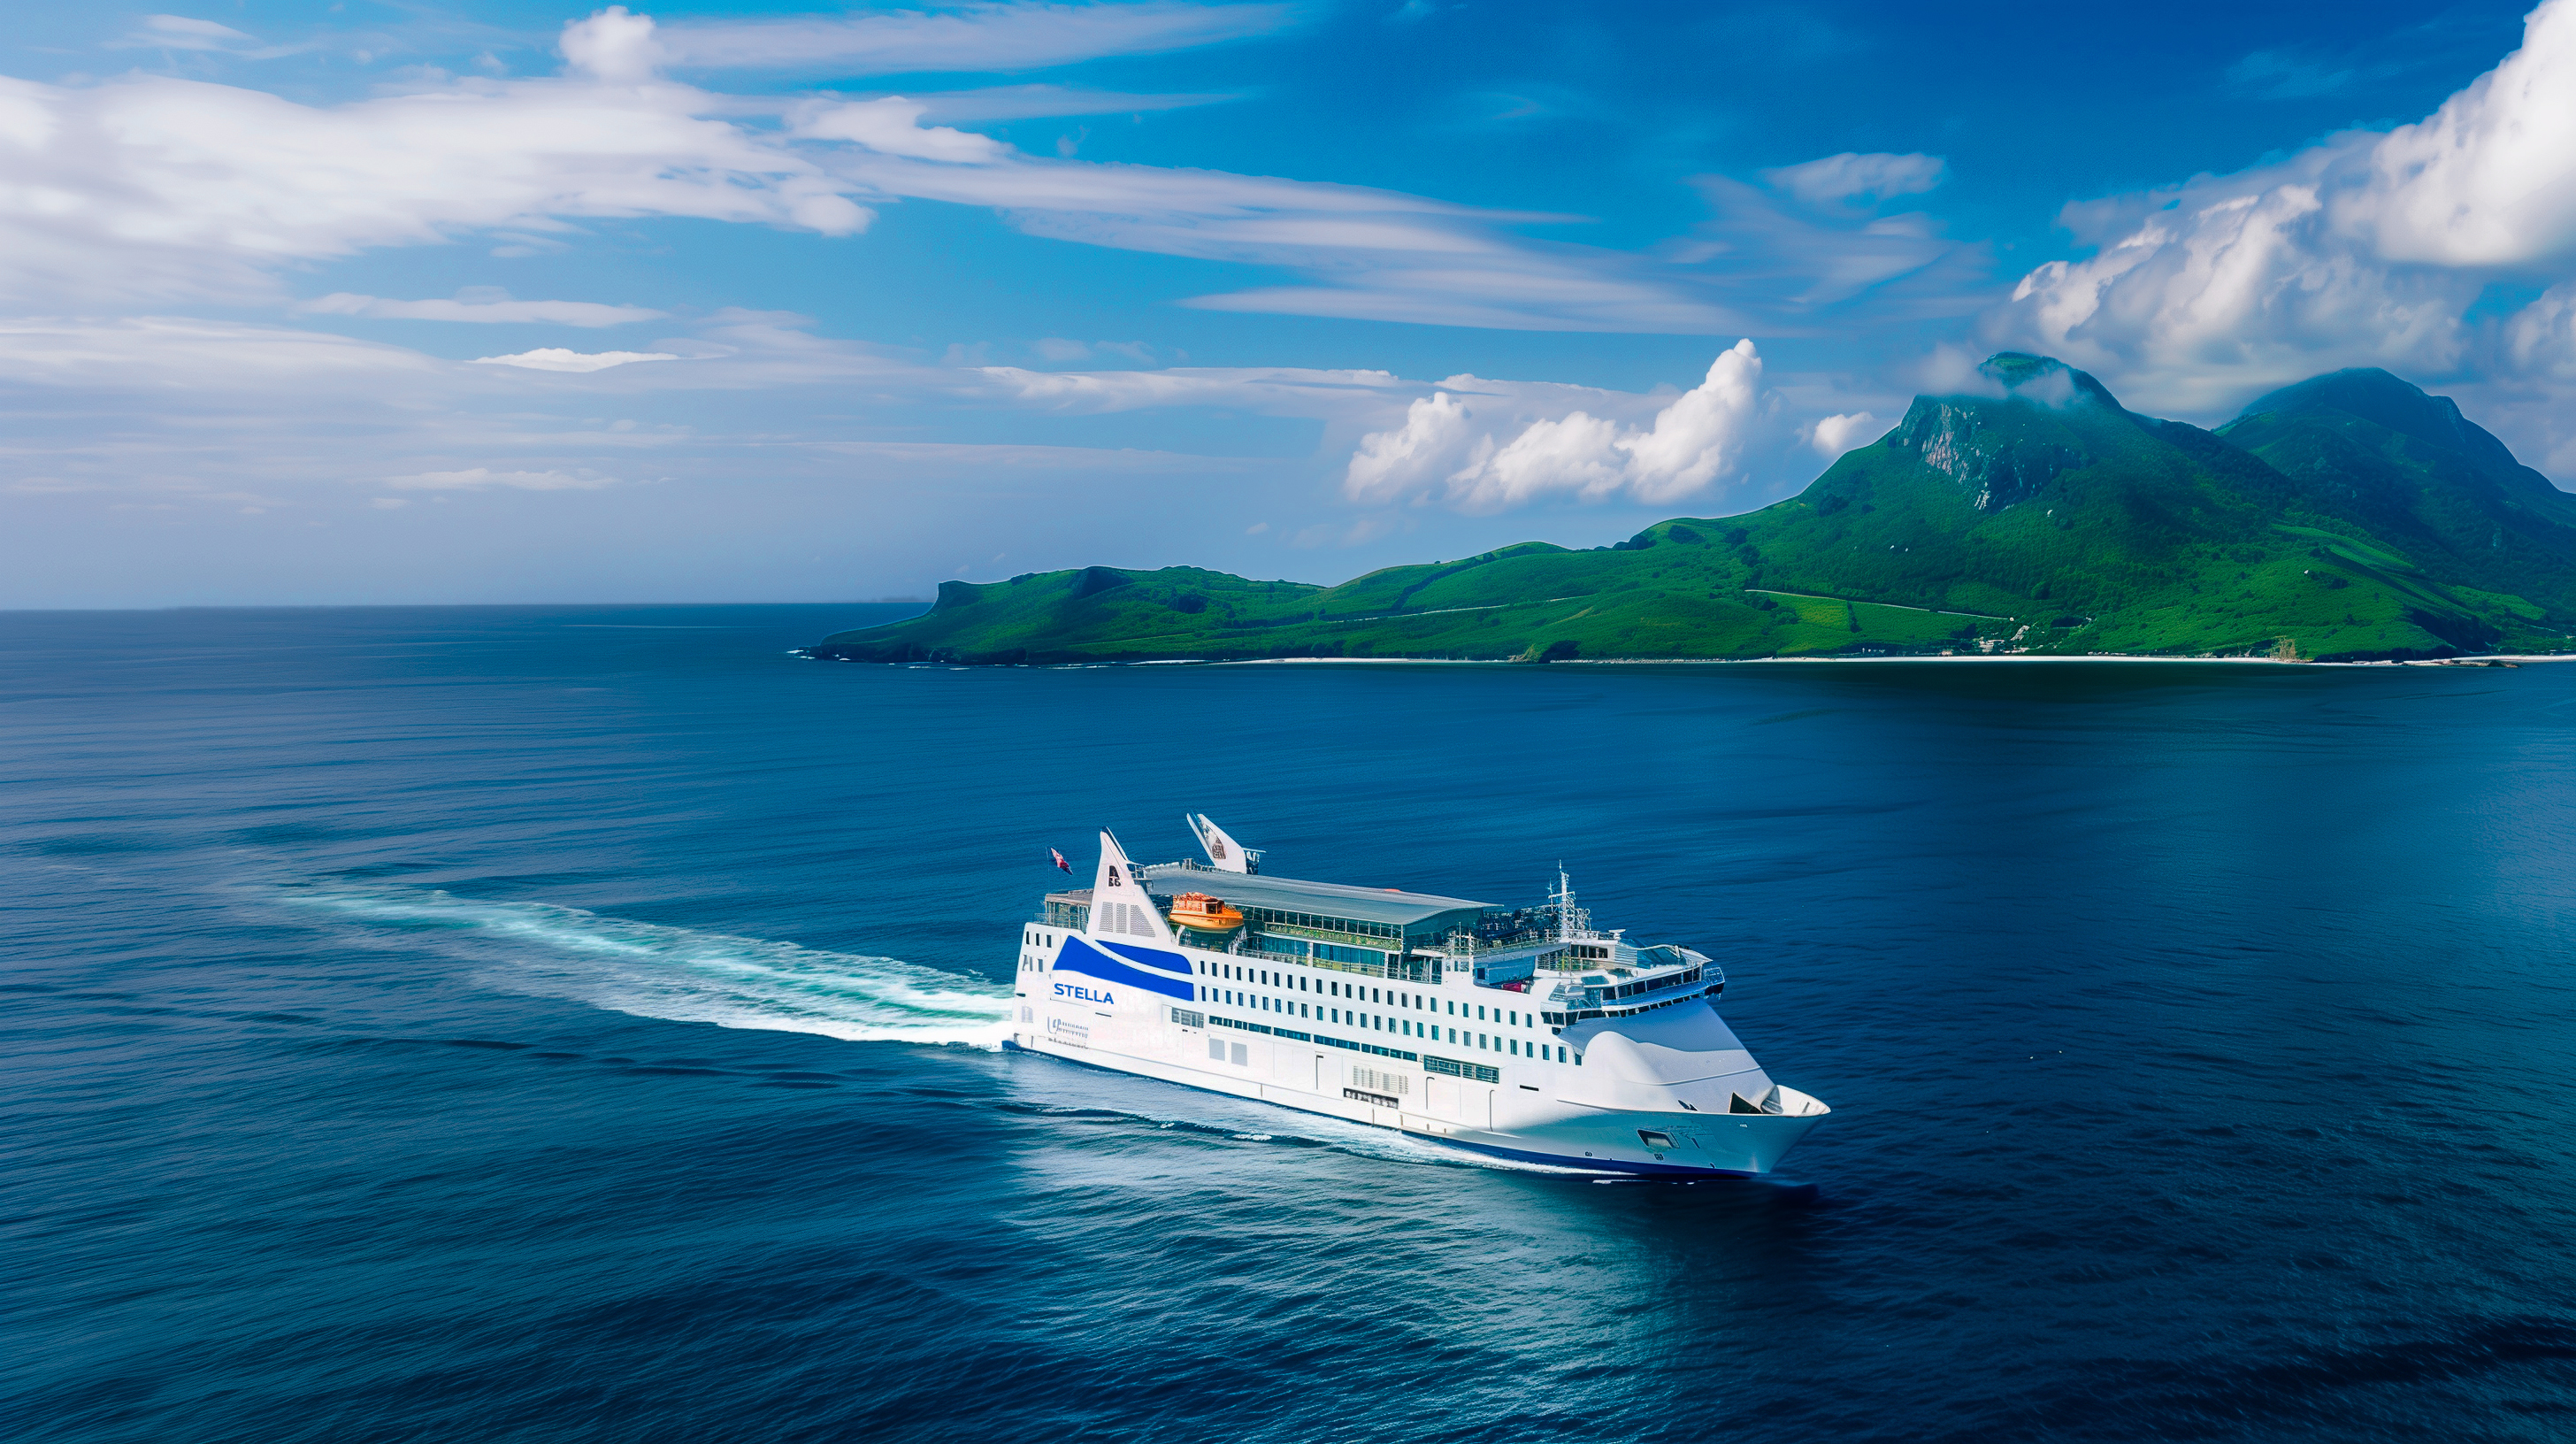 The image shows a ferry named Stella driving on a deep blue ocean. In the background there is an island with green hills, a blue sky with some white clouds.